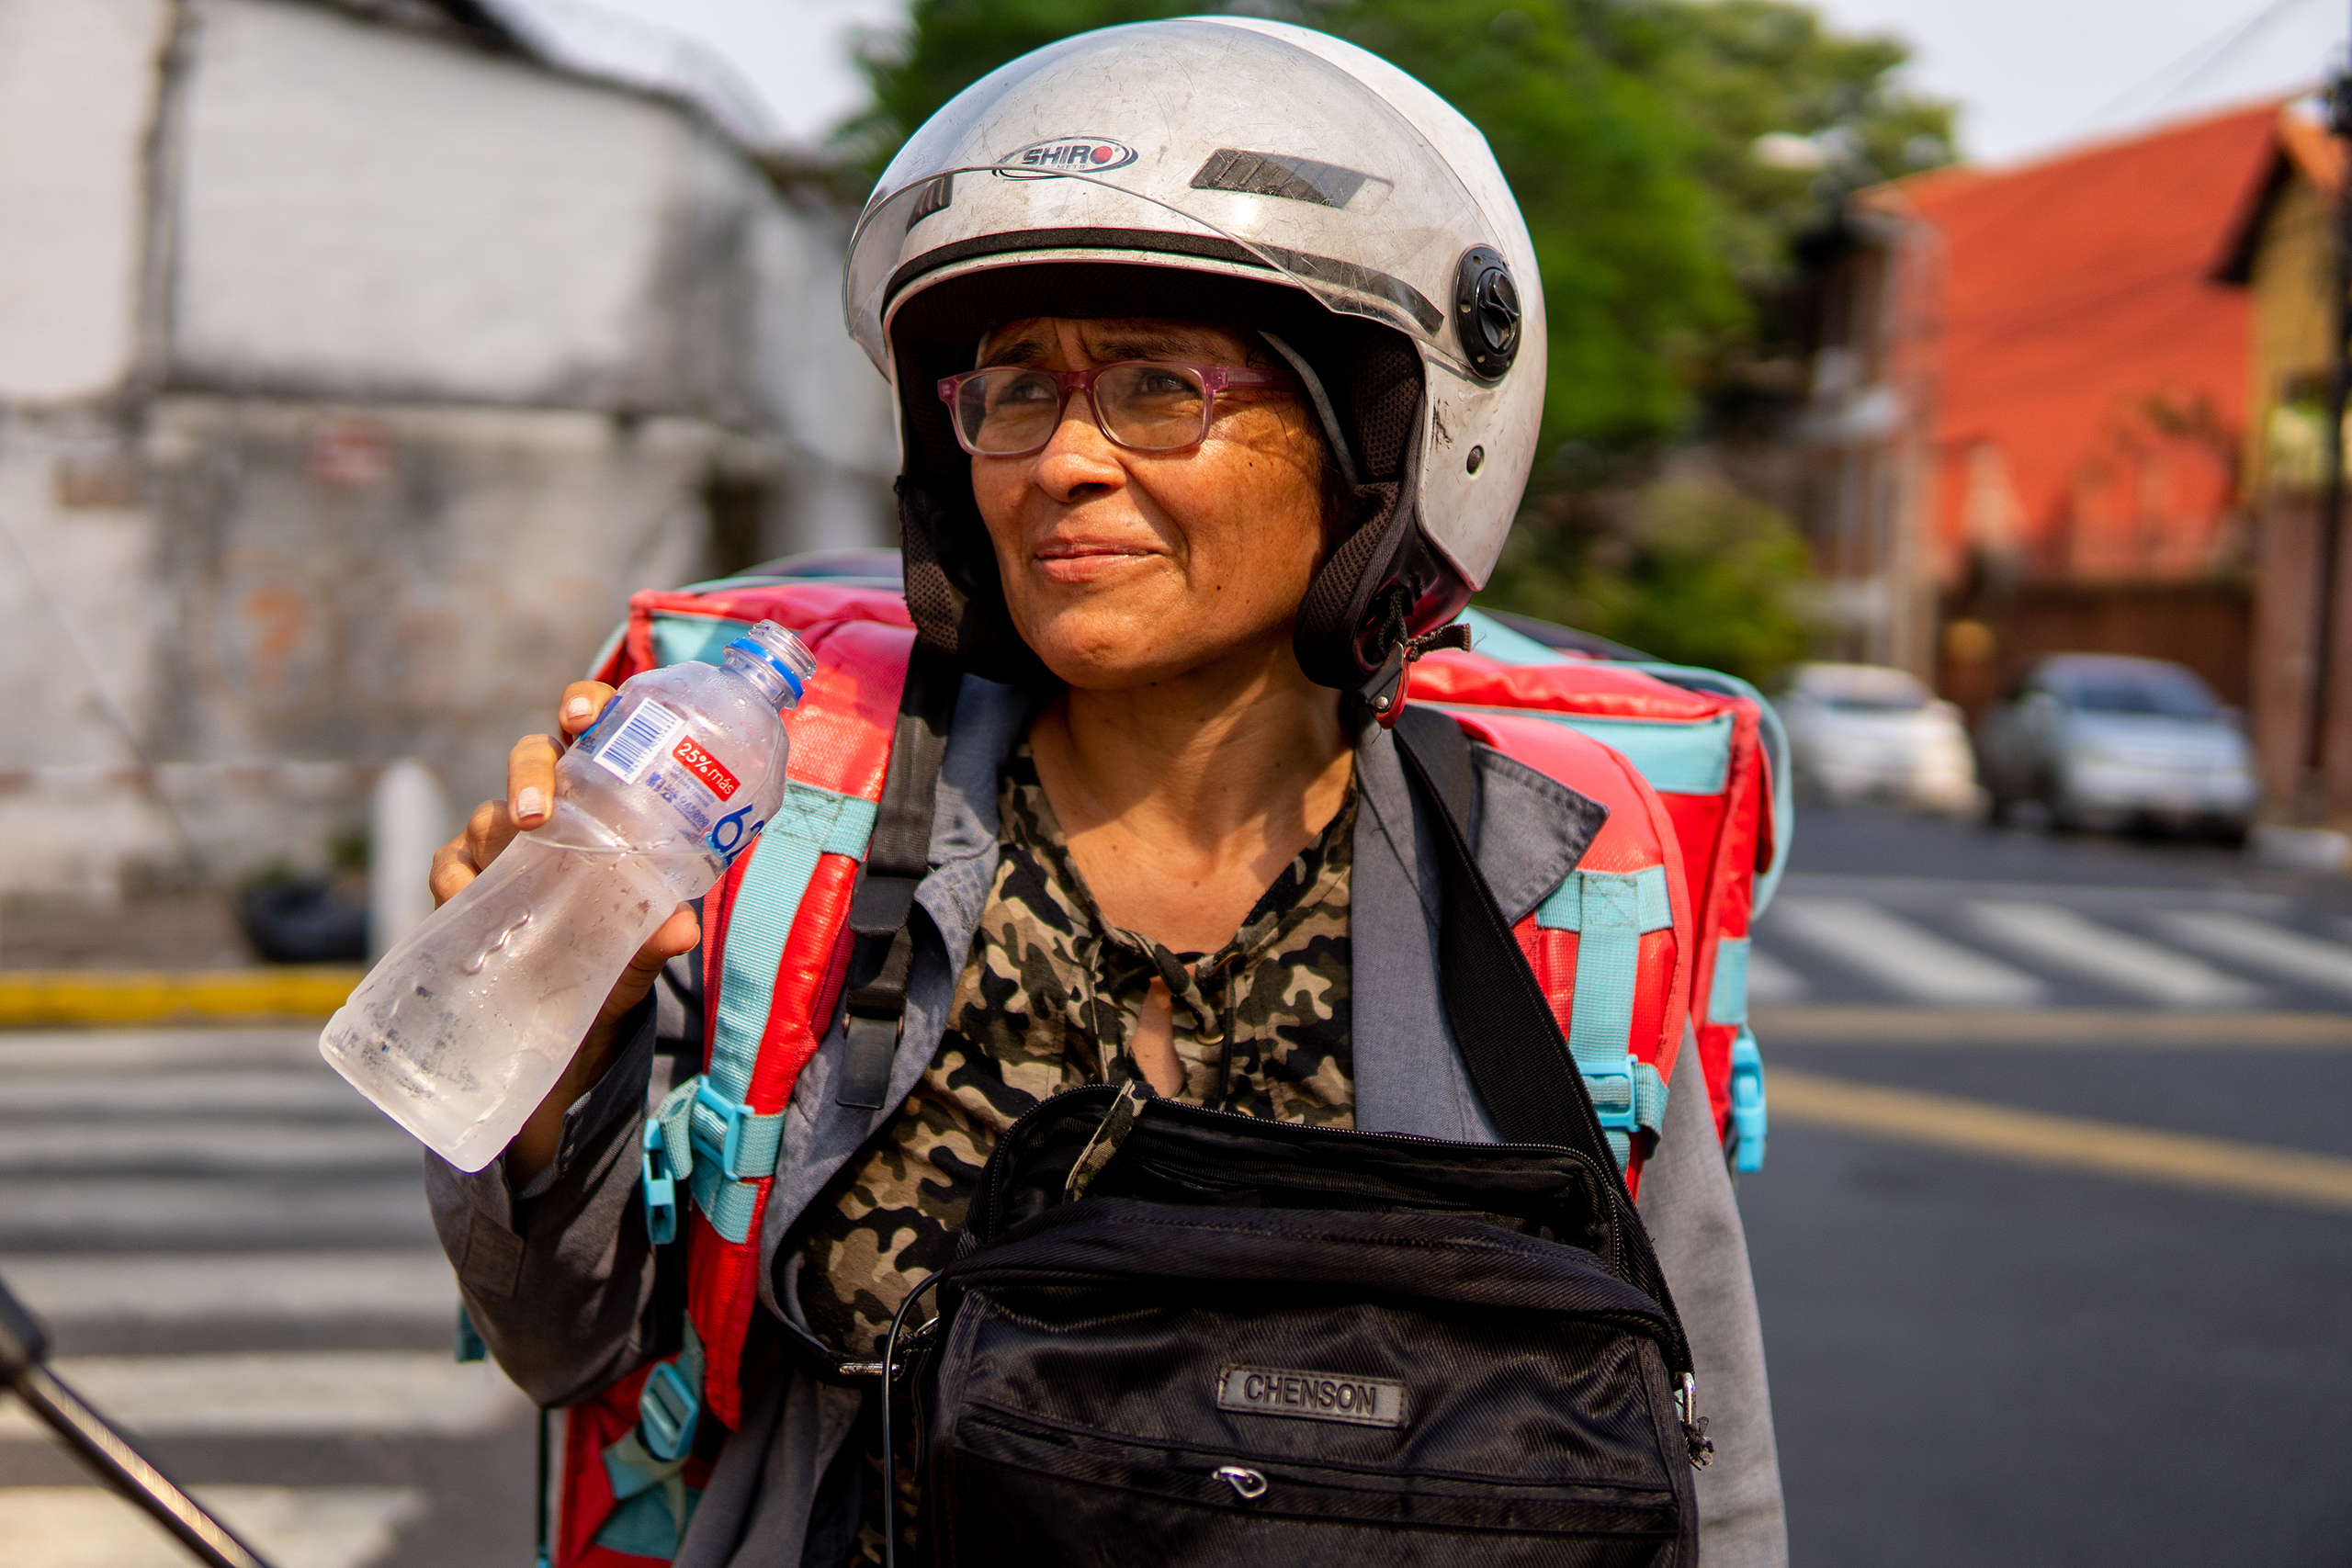 <p>A delivery driver takes a break to hydrate in Greater Asunción, Paraguay. People working outdoors are among the workers most affected by climate change, and are especially vulnerable to heat (Image: Elisa Marecos &amp; Sandino Flecha / El Surtidor)</p>